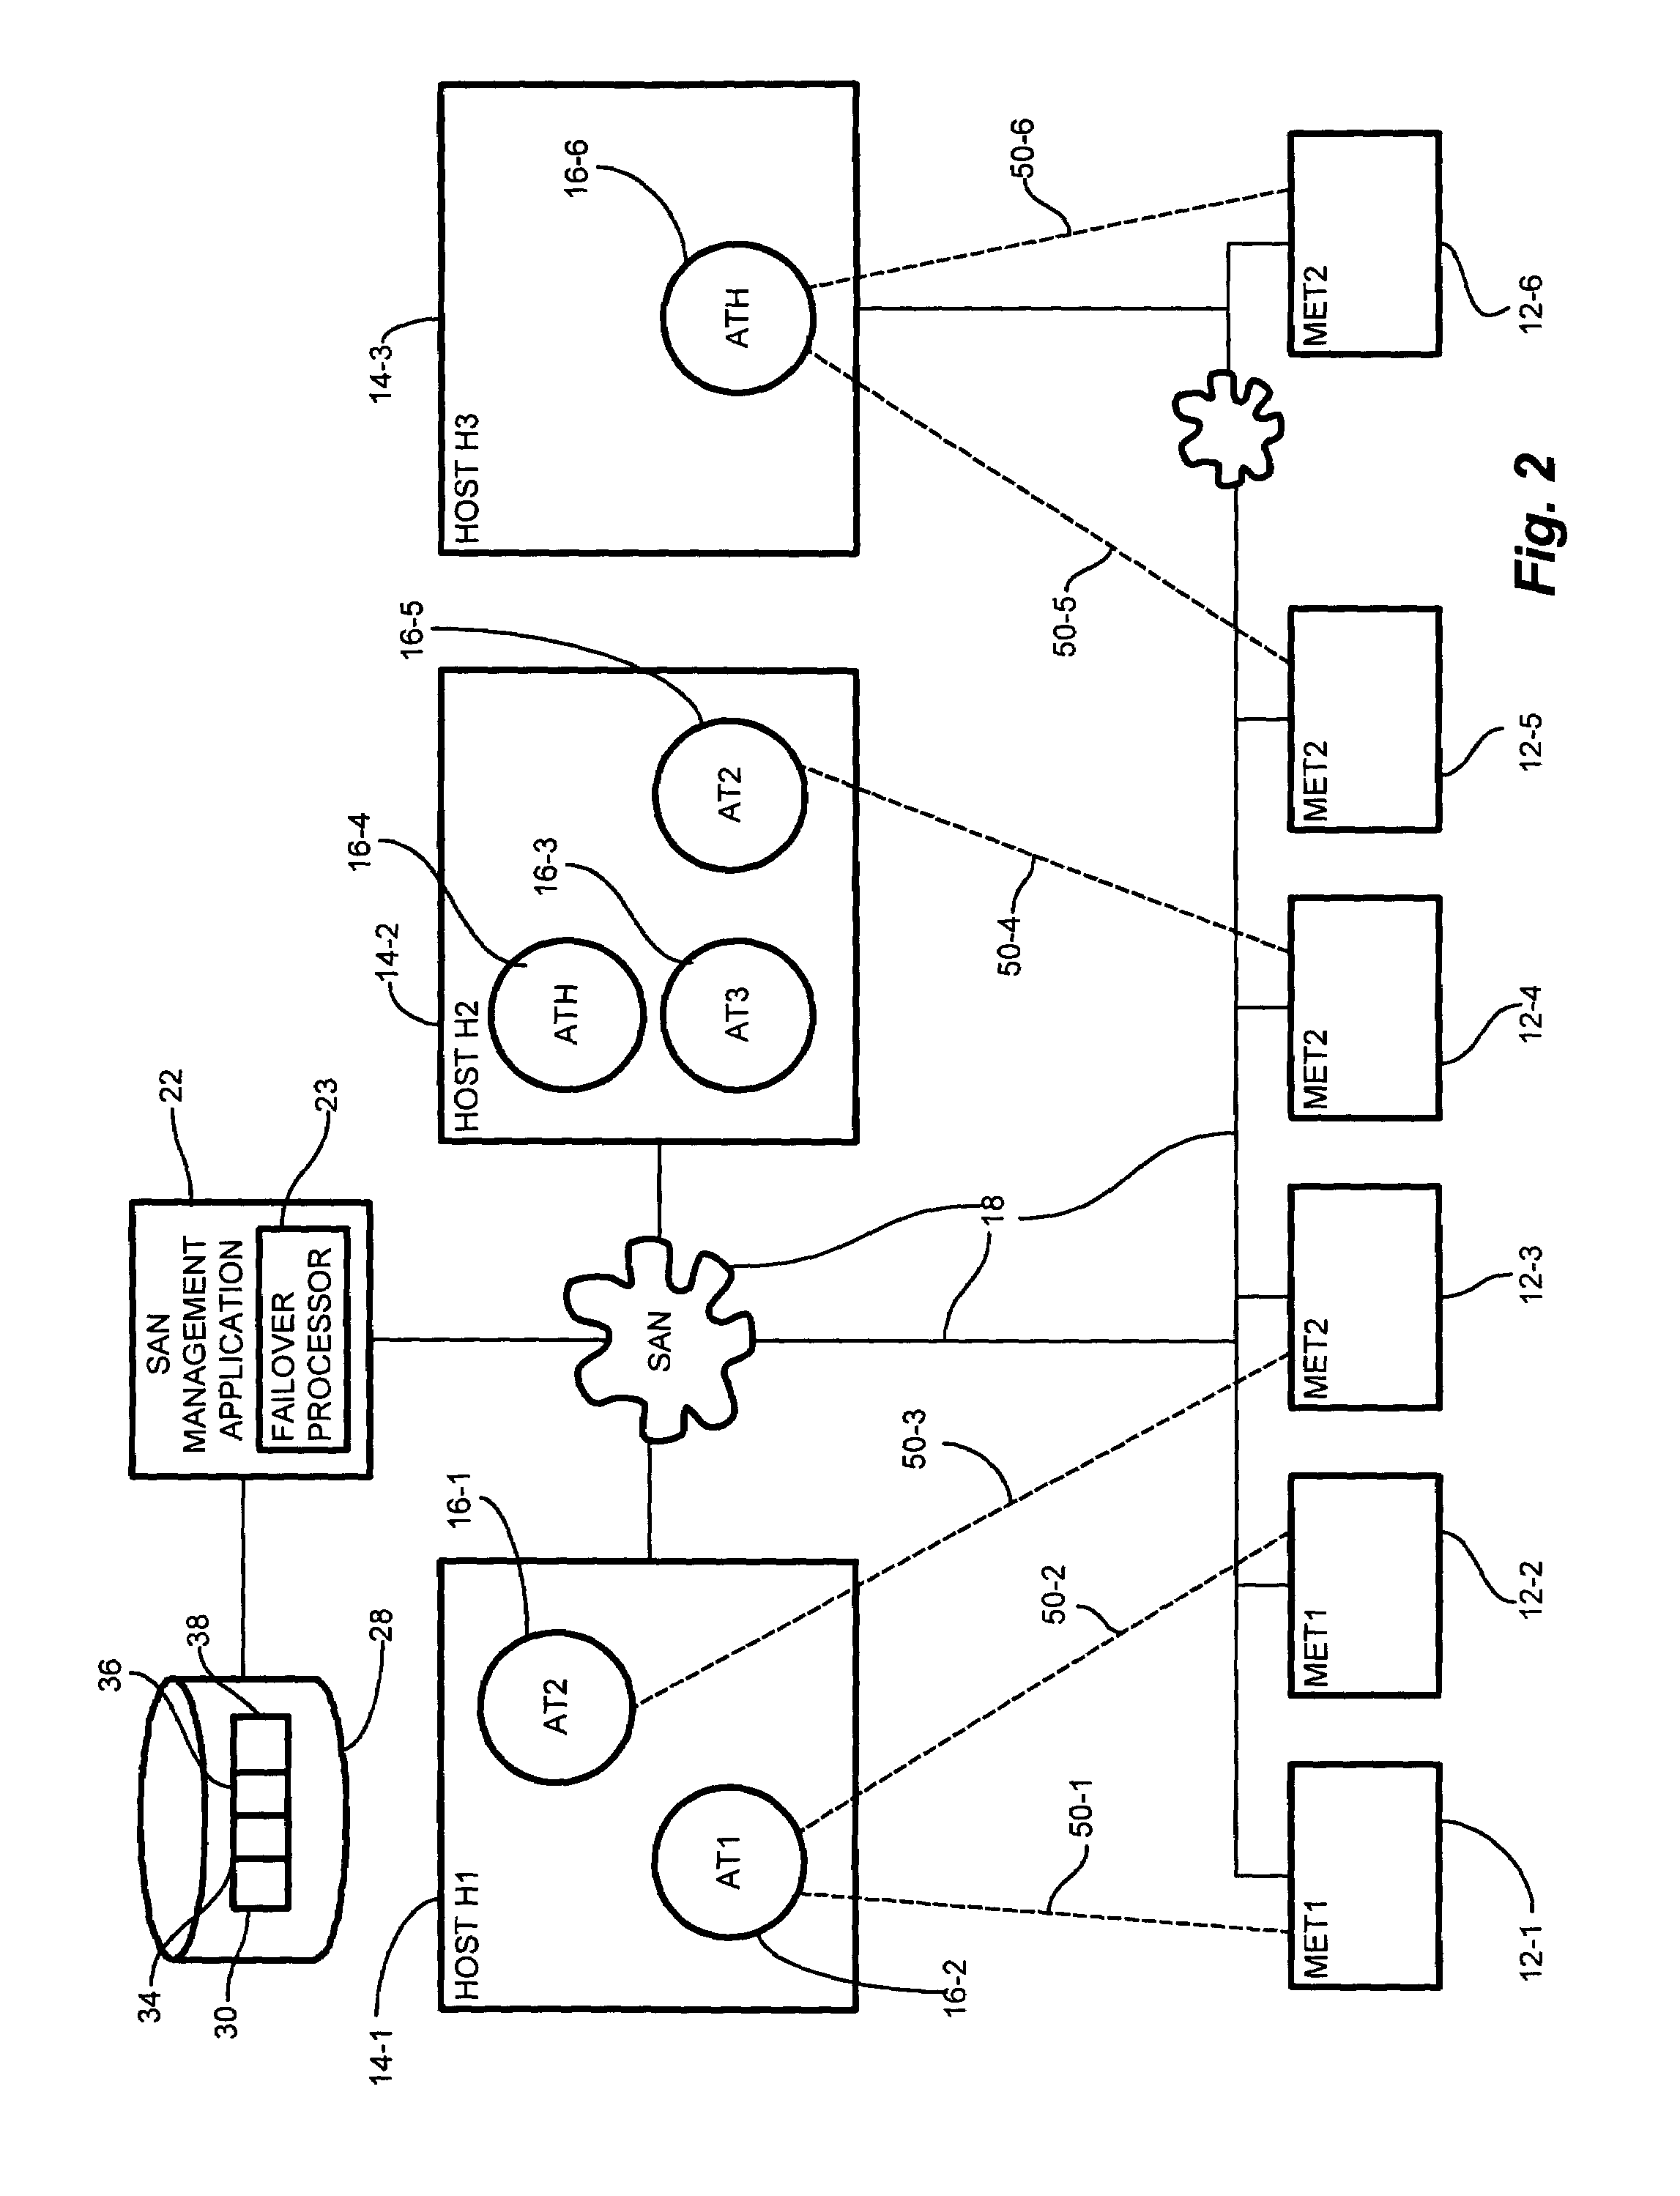 System and methods for failover management of manageable entity agents